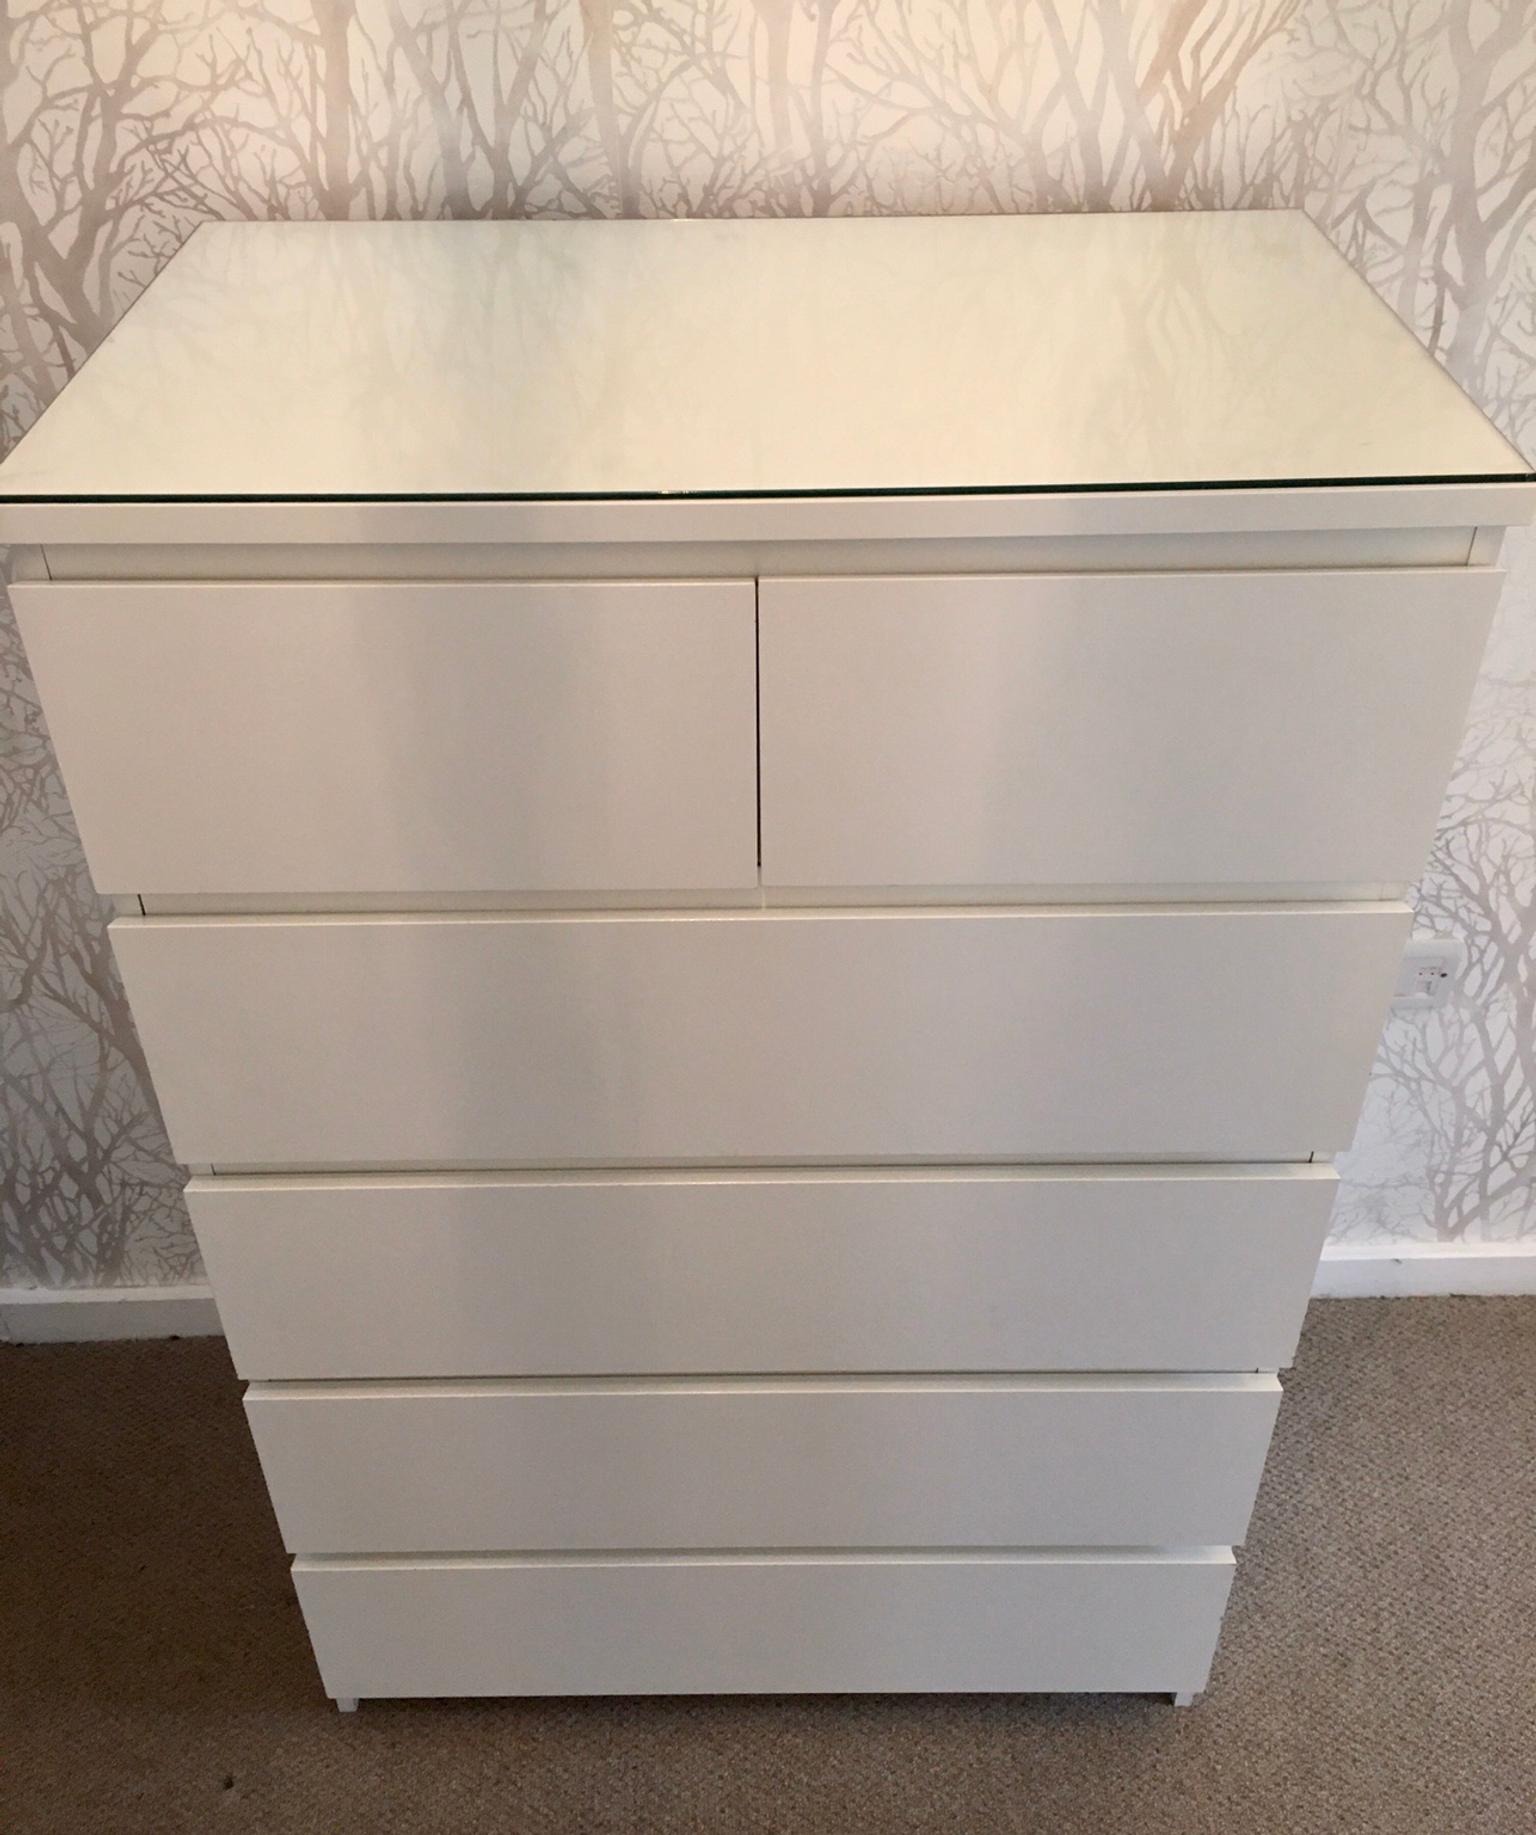 Glass Top White Gloss Malm 6 Drawer Chest In Se15 London For